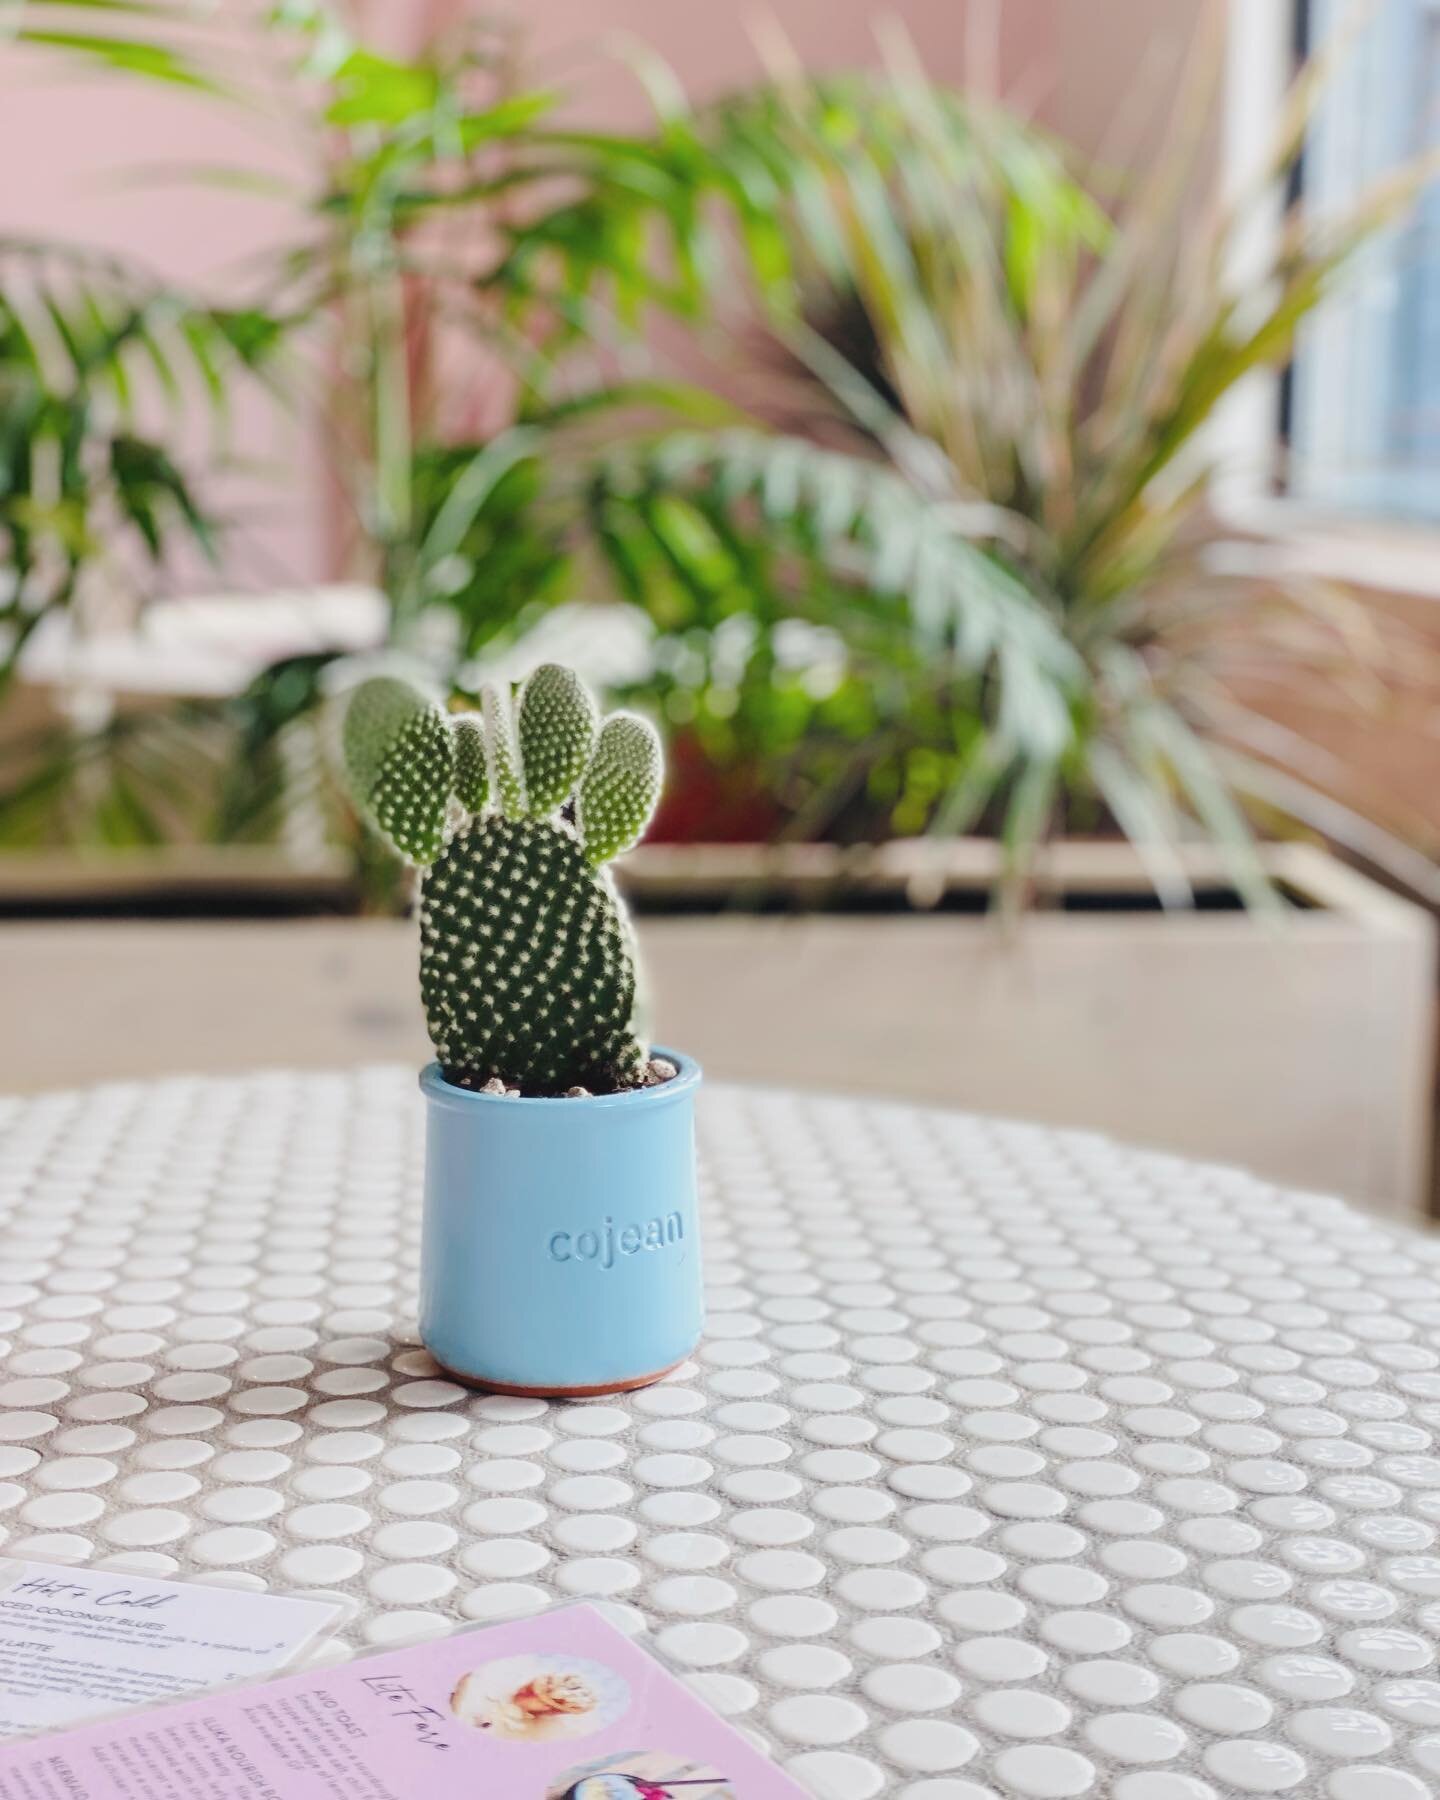 This adorable little plant from @viplantshop has found it&rsquo;s home in this cute ceramic container I picked up in Paris a few years ago from @cojeanrestaurants 

#plqnts #cactus #saturday #repurpose #shoplocal